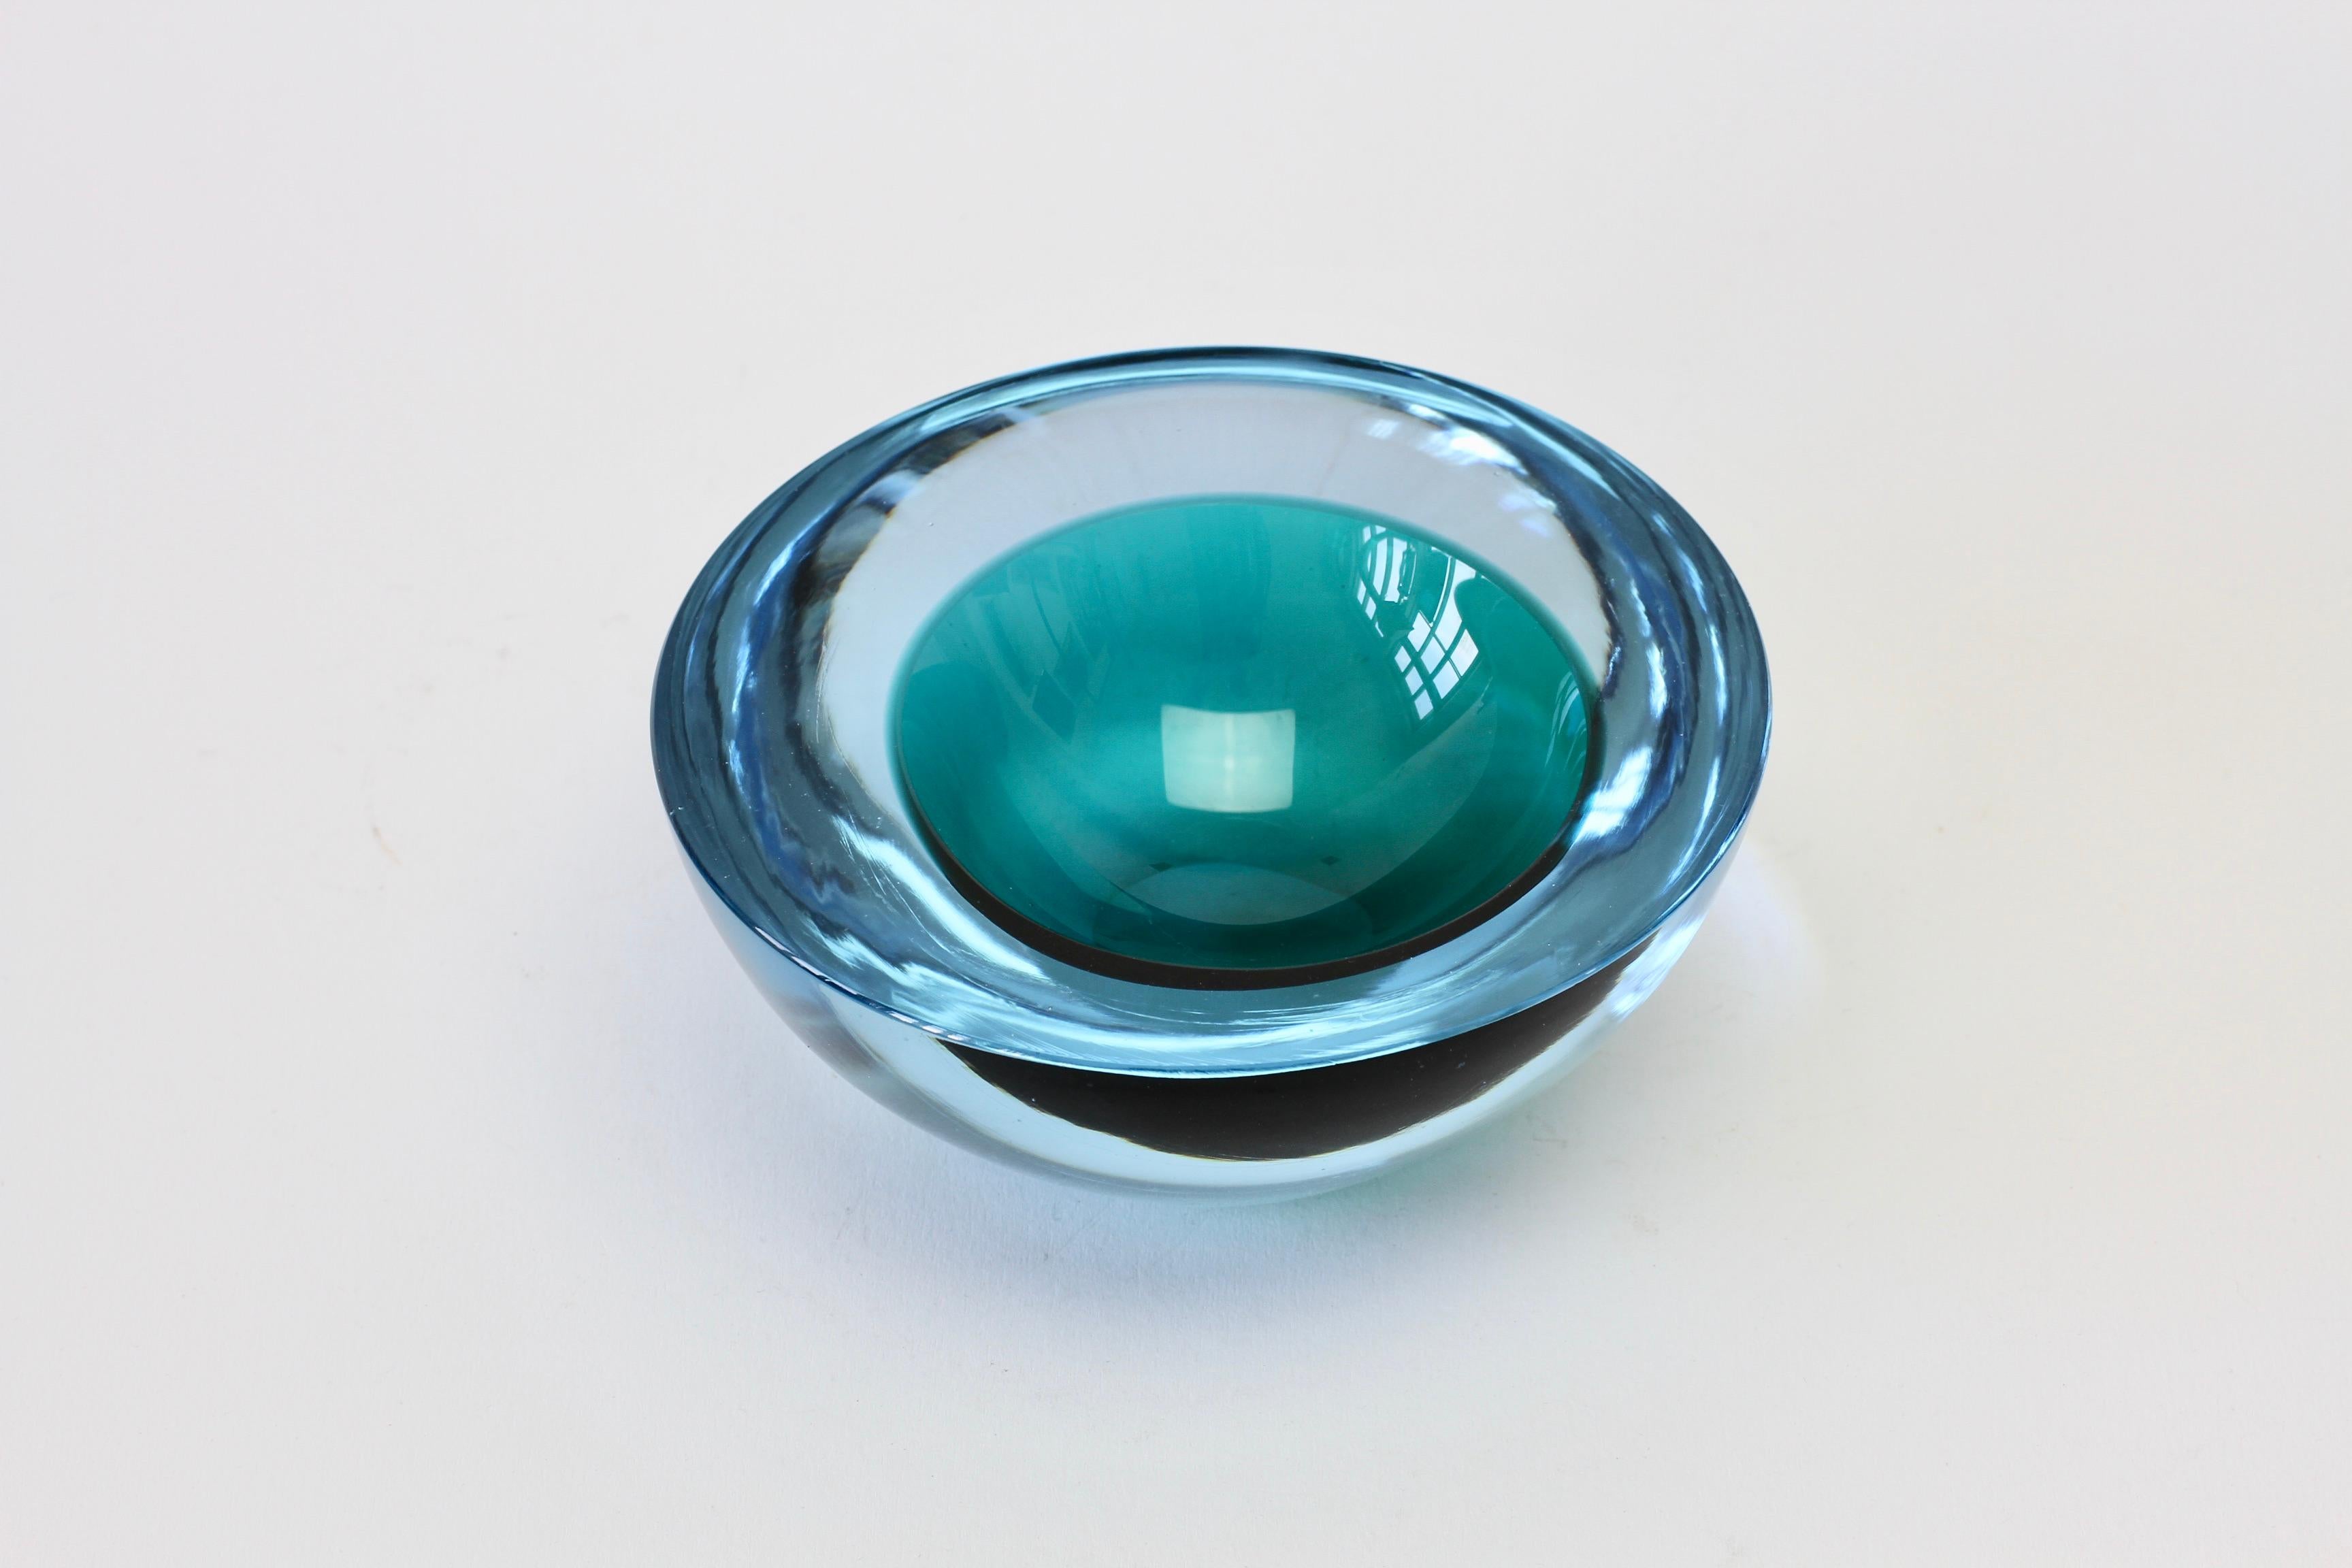 Large Cenedese Italian Blue & Green Sommerso Murano Glass Bowl, Dish or Ashtray 11